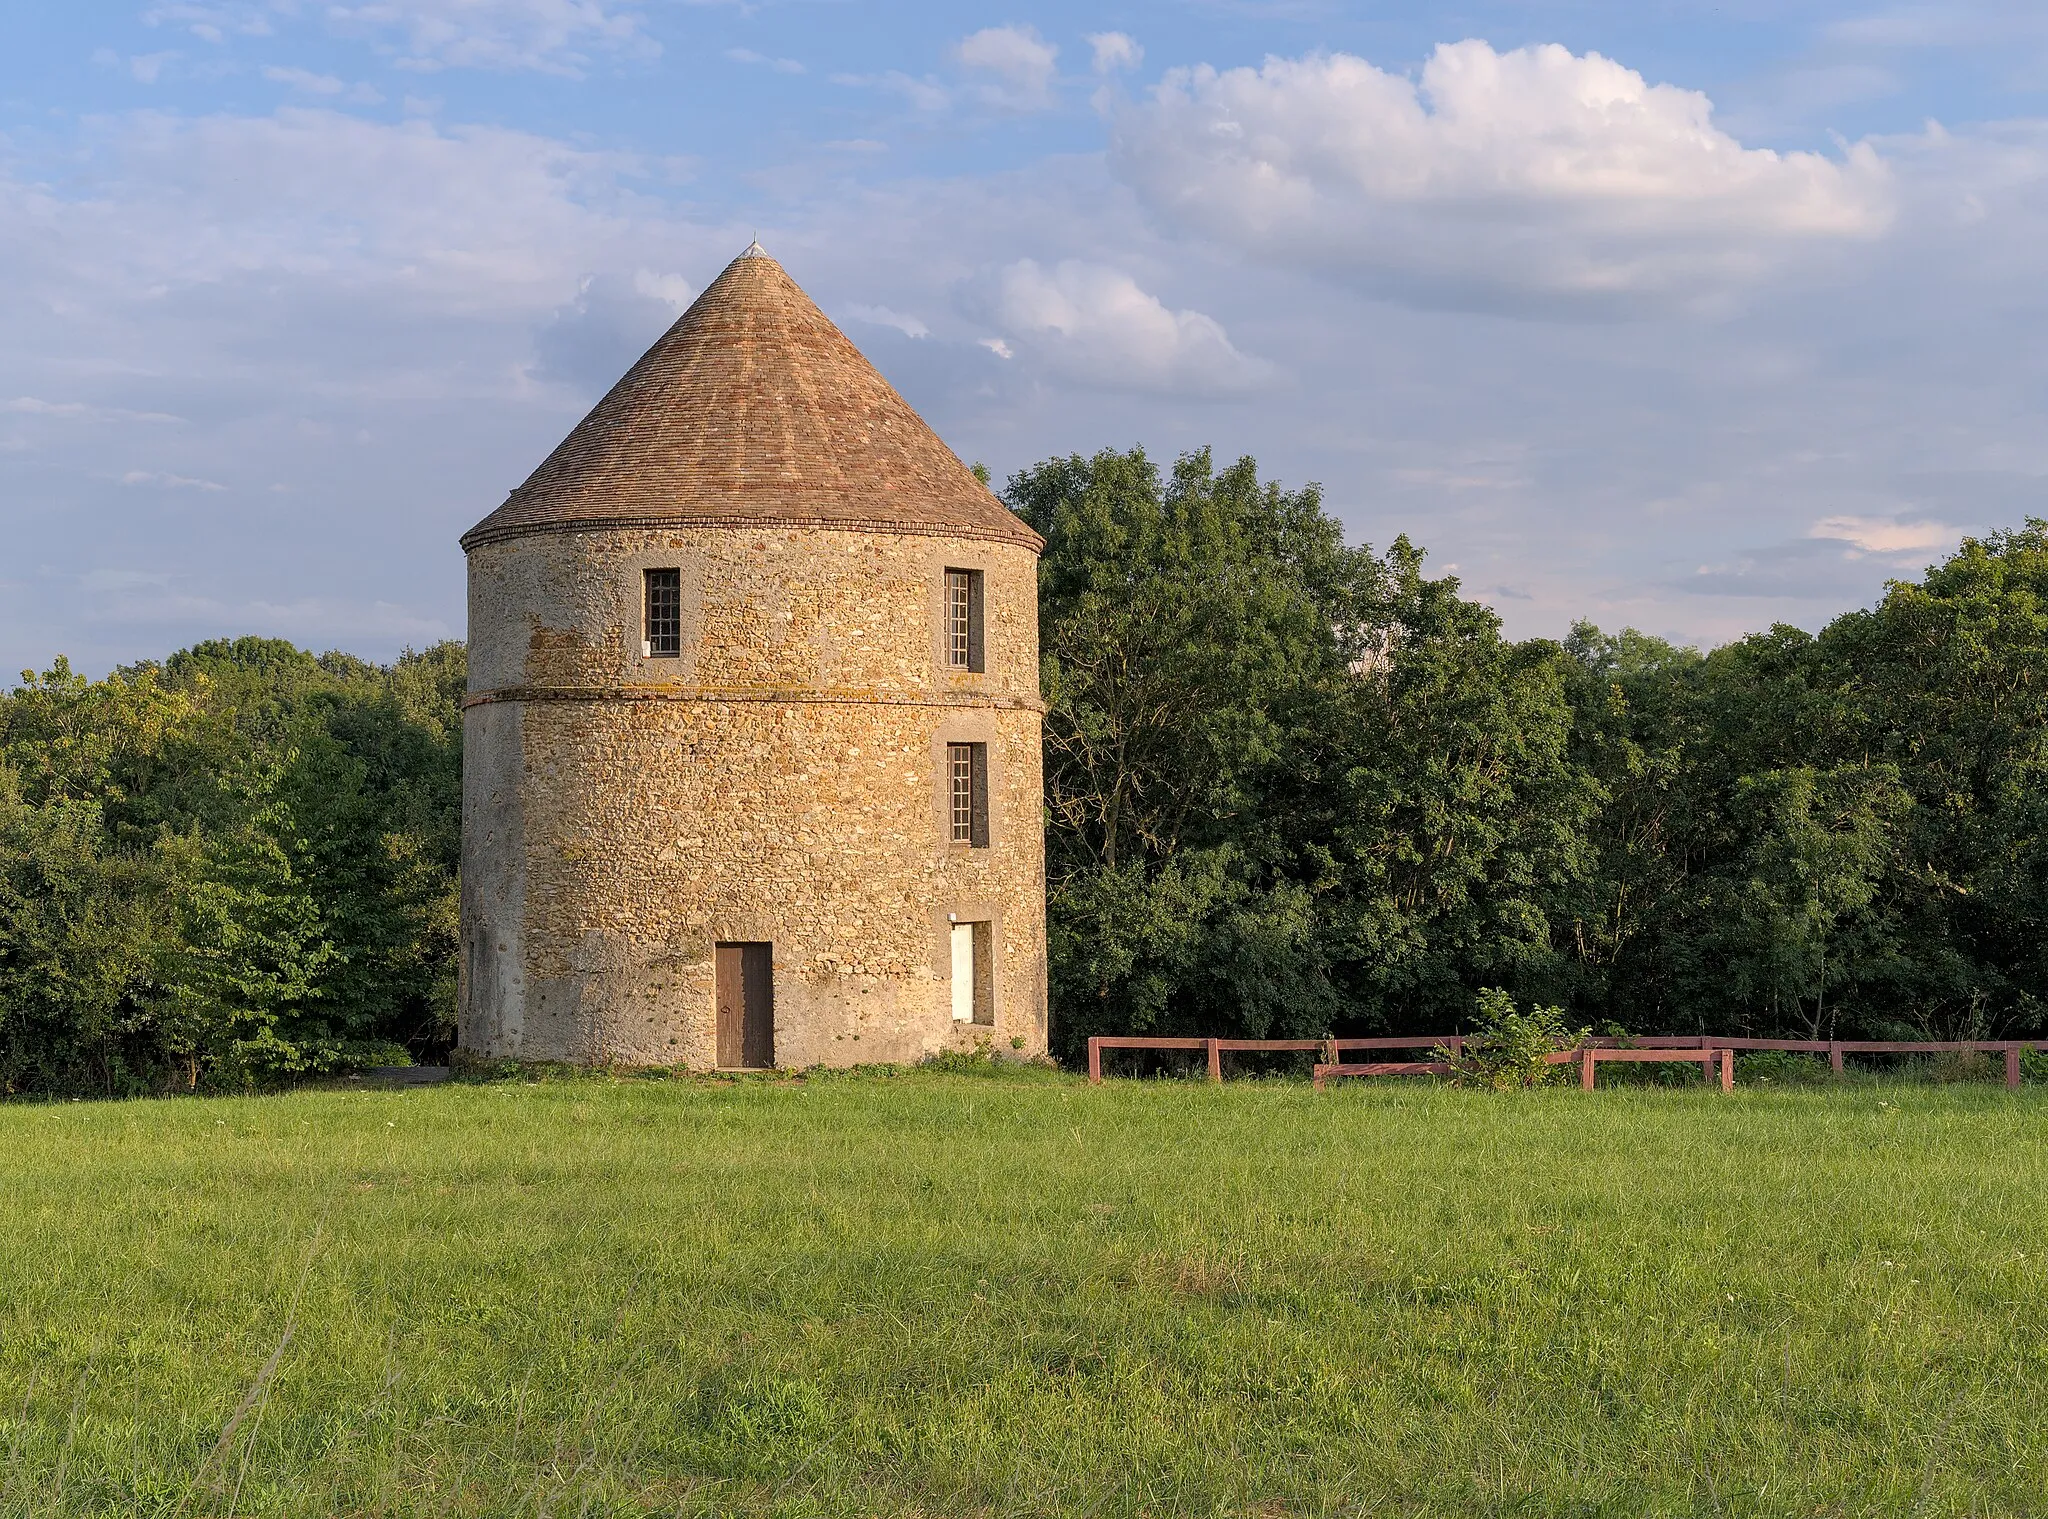 Photo showing: Colombier de l'abbaye (dovecote tower of the abbey) in Vauhallan, France